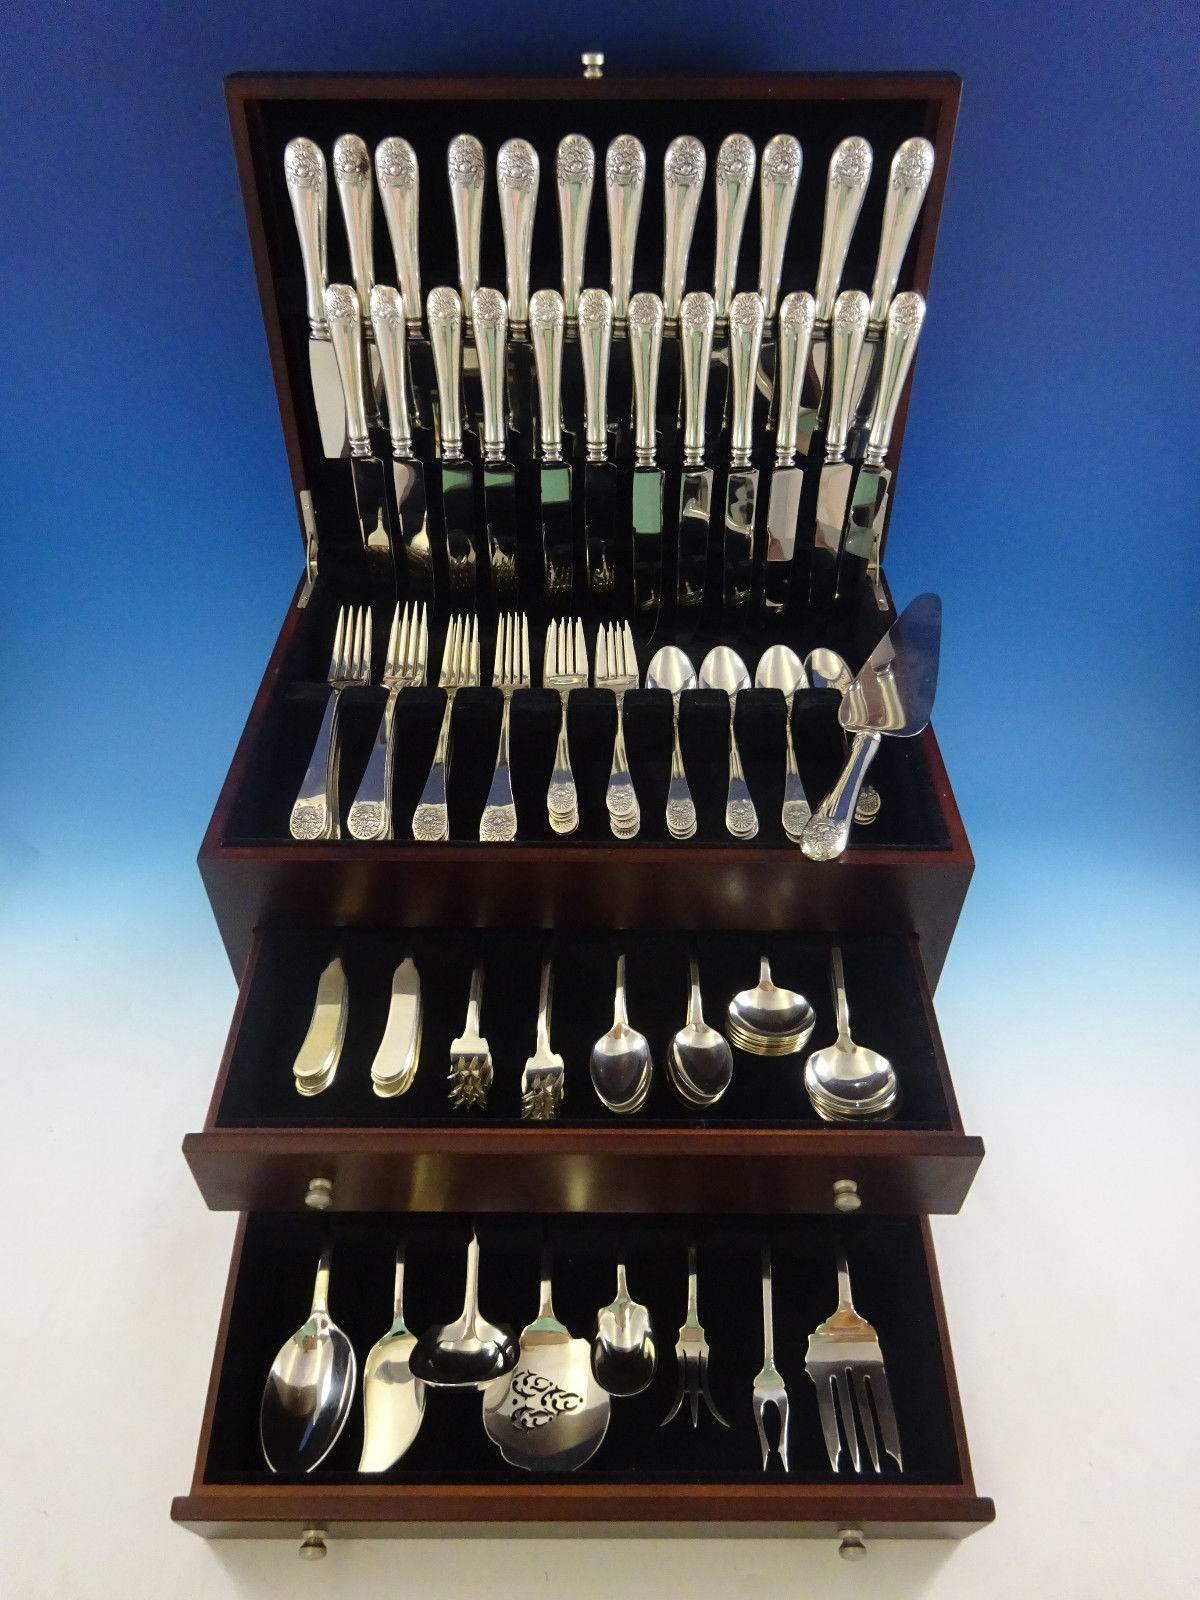 Rare vintage Basket of Flowers by Tuttle Sterling Silver Dinner and Luncheon Flatware set - 126 pieces. Hallmark for President Herbert Hoover (1929-1933). This set includes:
 
12 Dinner Size Knives, 9 3/4